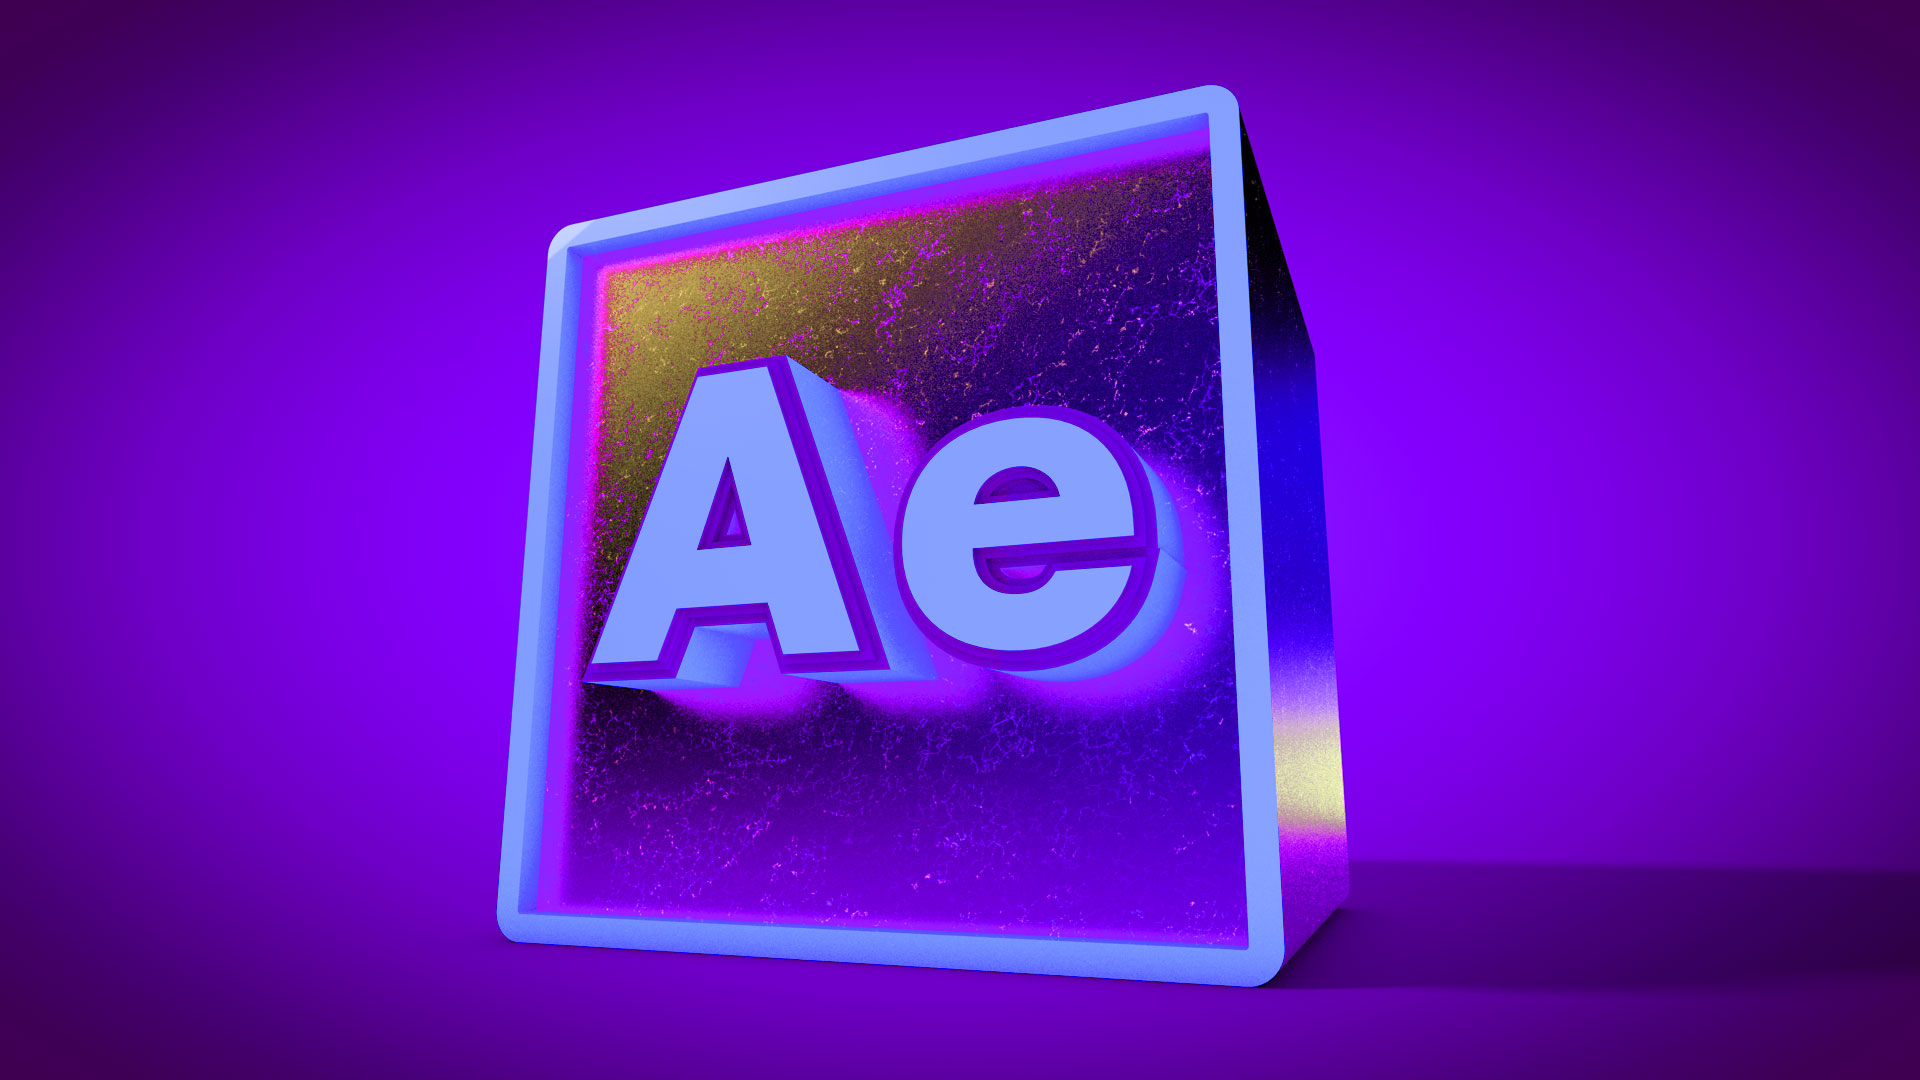 After effects packs. After Effects. Adobe after Effects. Adobe after Effects логотип. Адобе Афтер эффект.